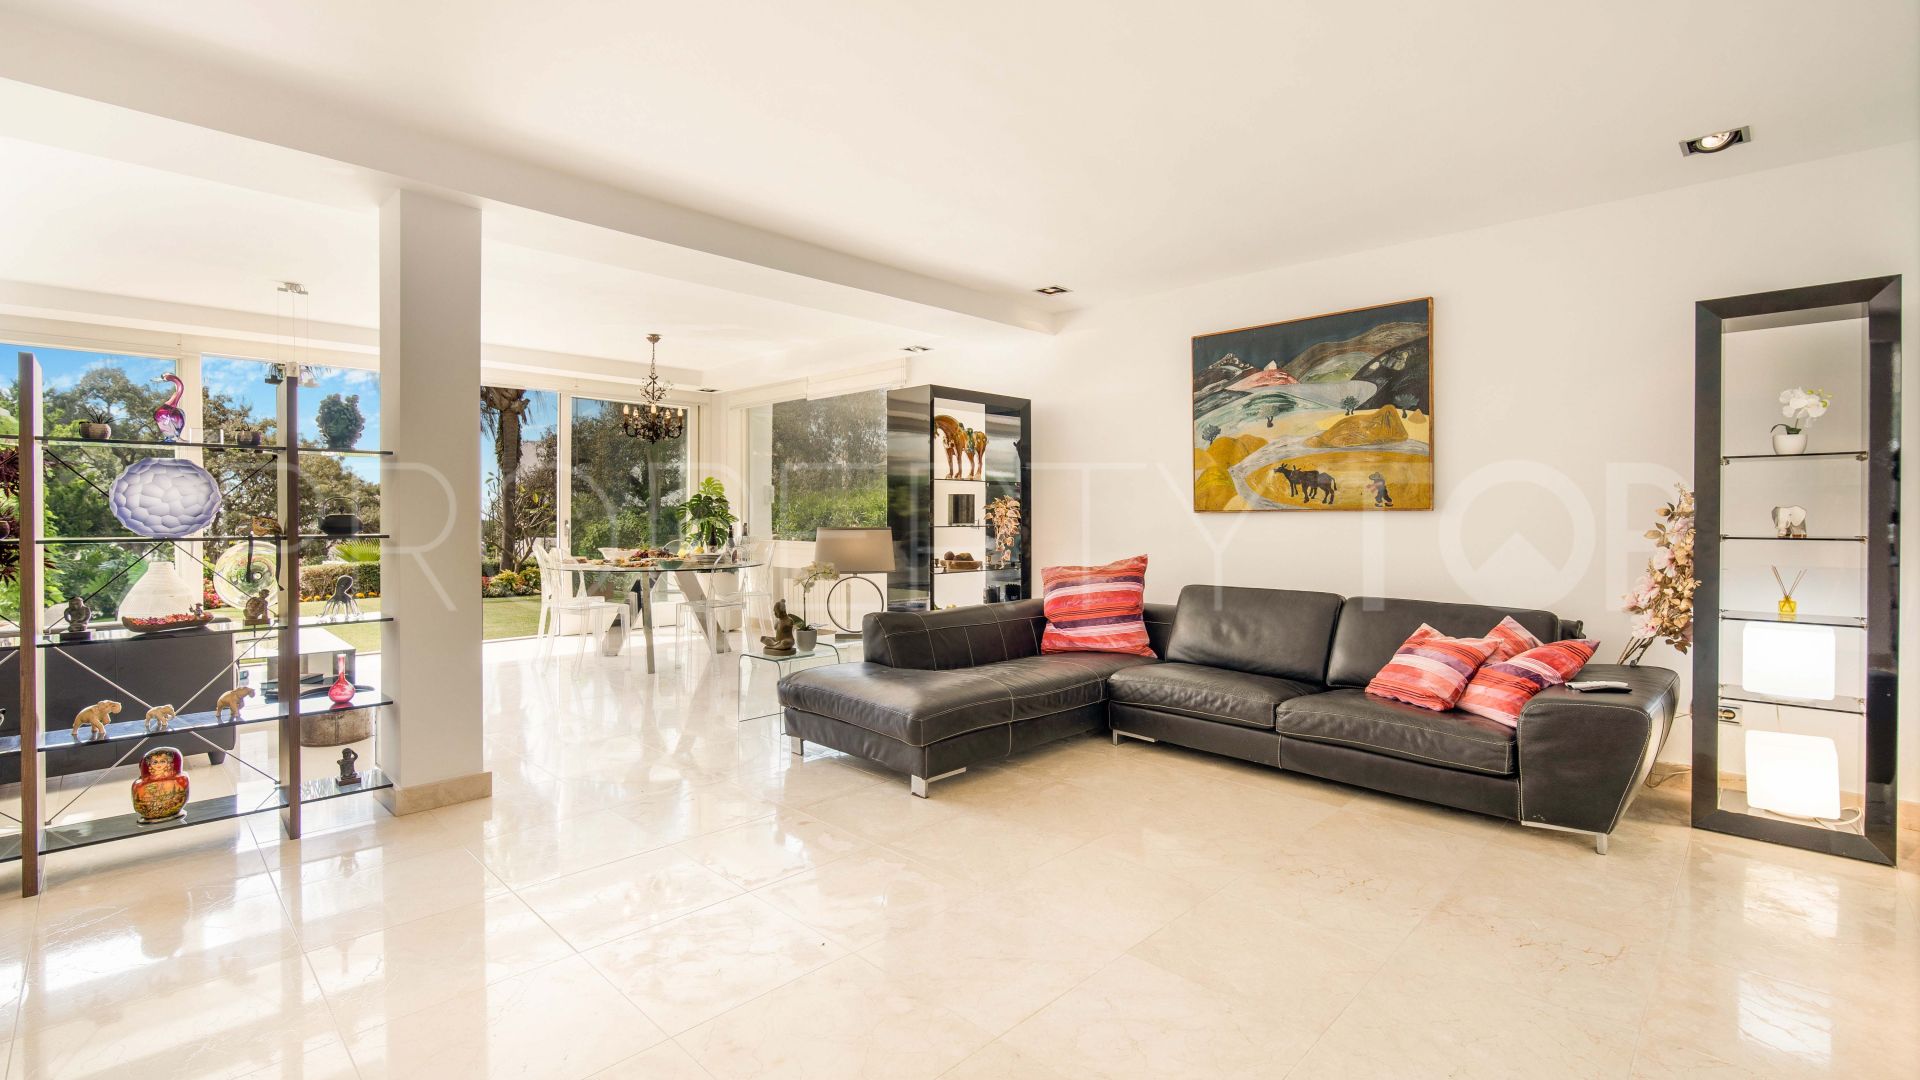 Villa with 4 bedrooms for sale in Calahonda